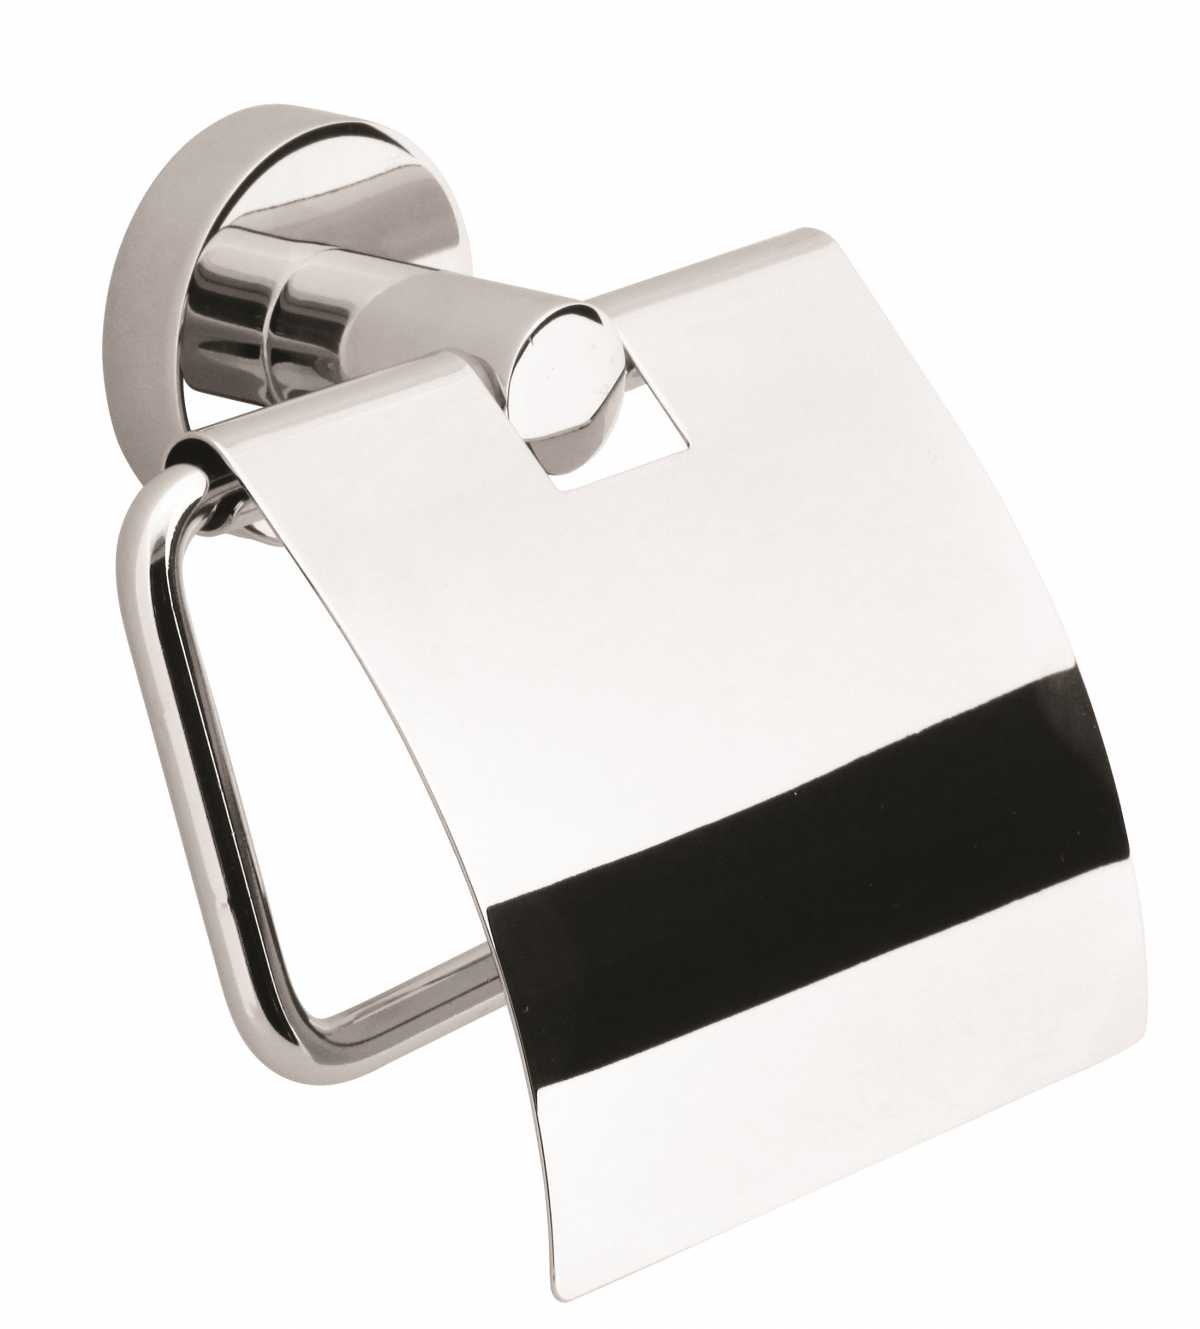 Hera Toilet Roll Holder with Flap